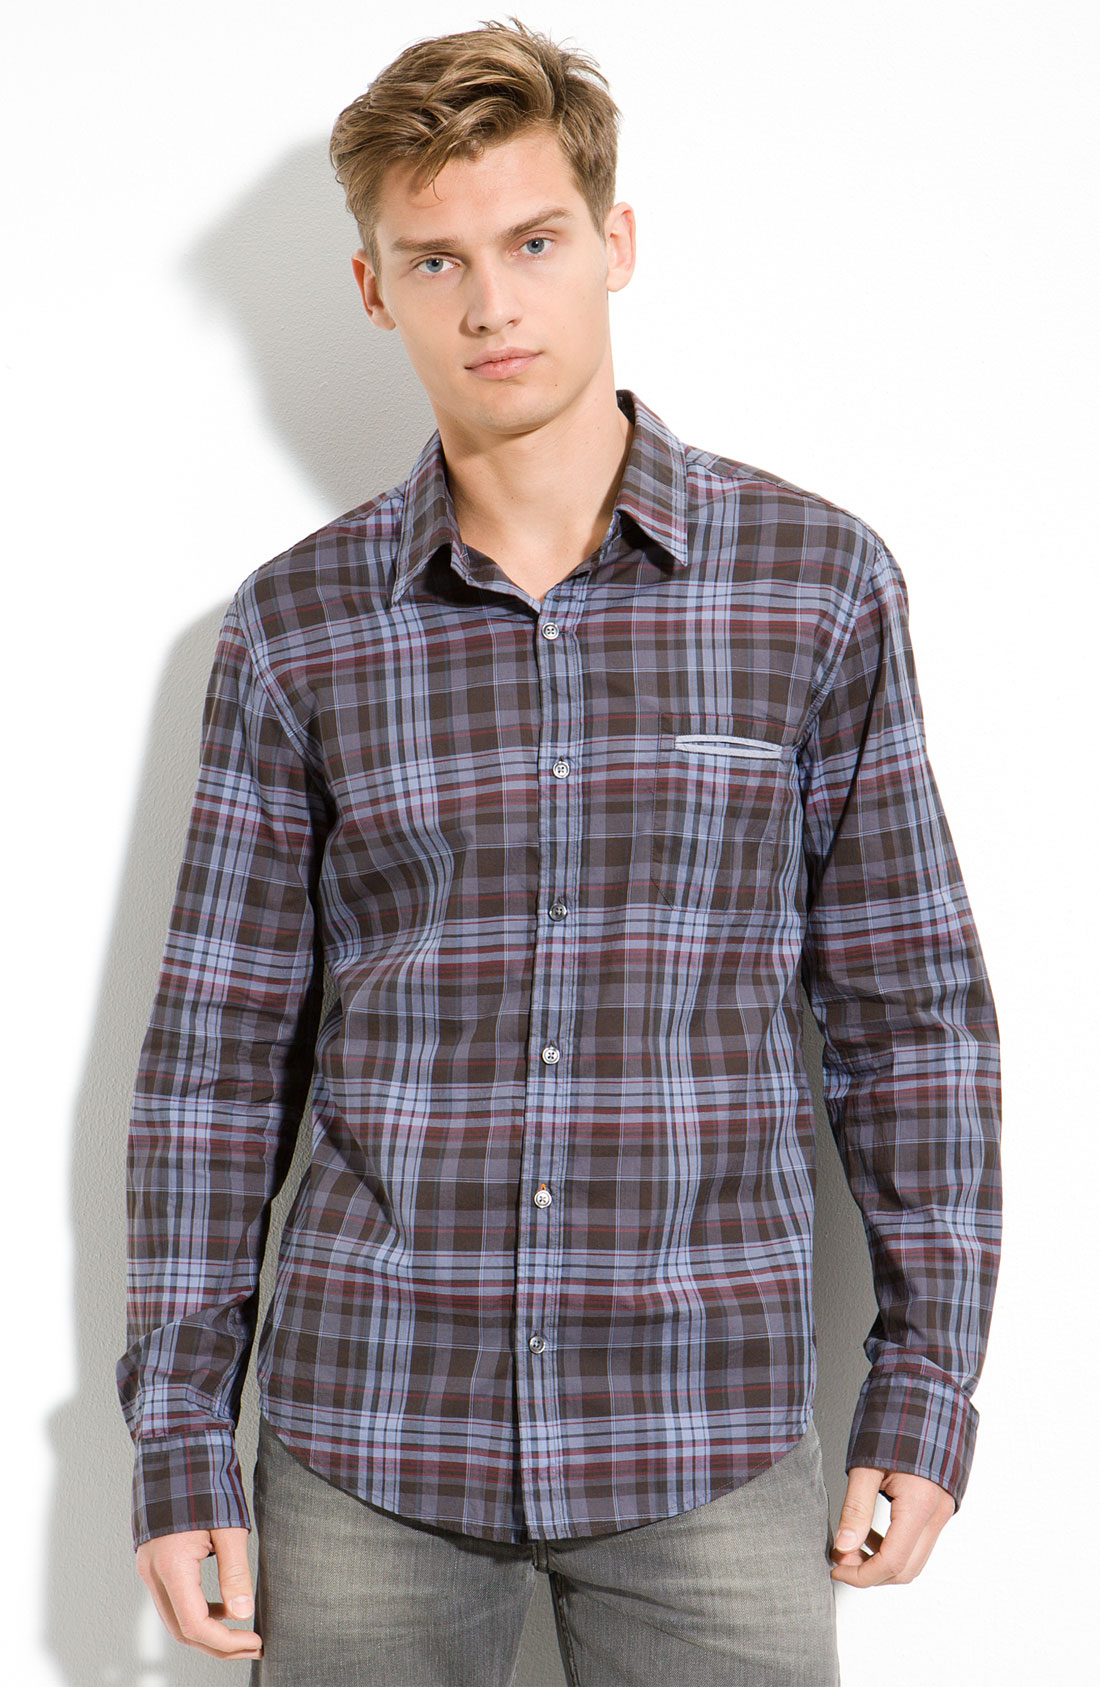 Hugo Boss Boss Orange Cielonuovotwoe Trim Fit Plaid Shirt In Red For Men Red Blue Plaid Lyst